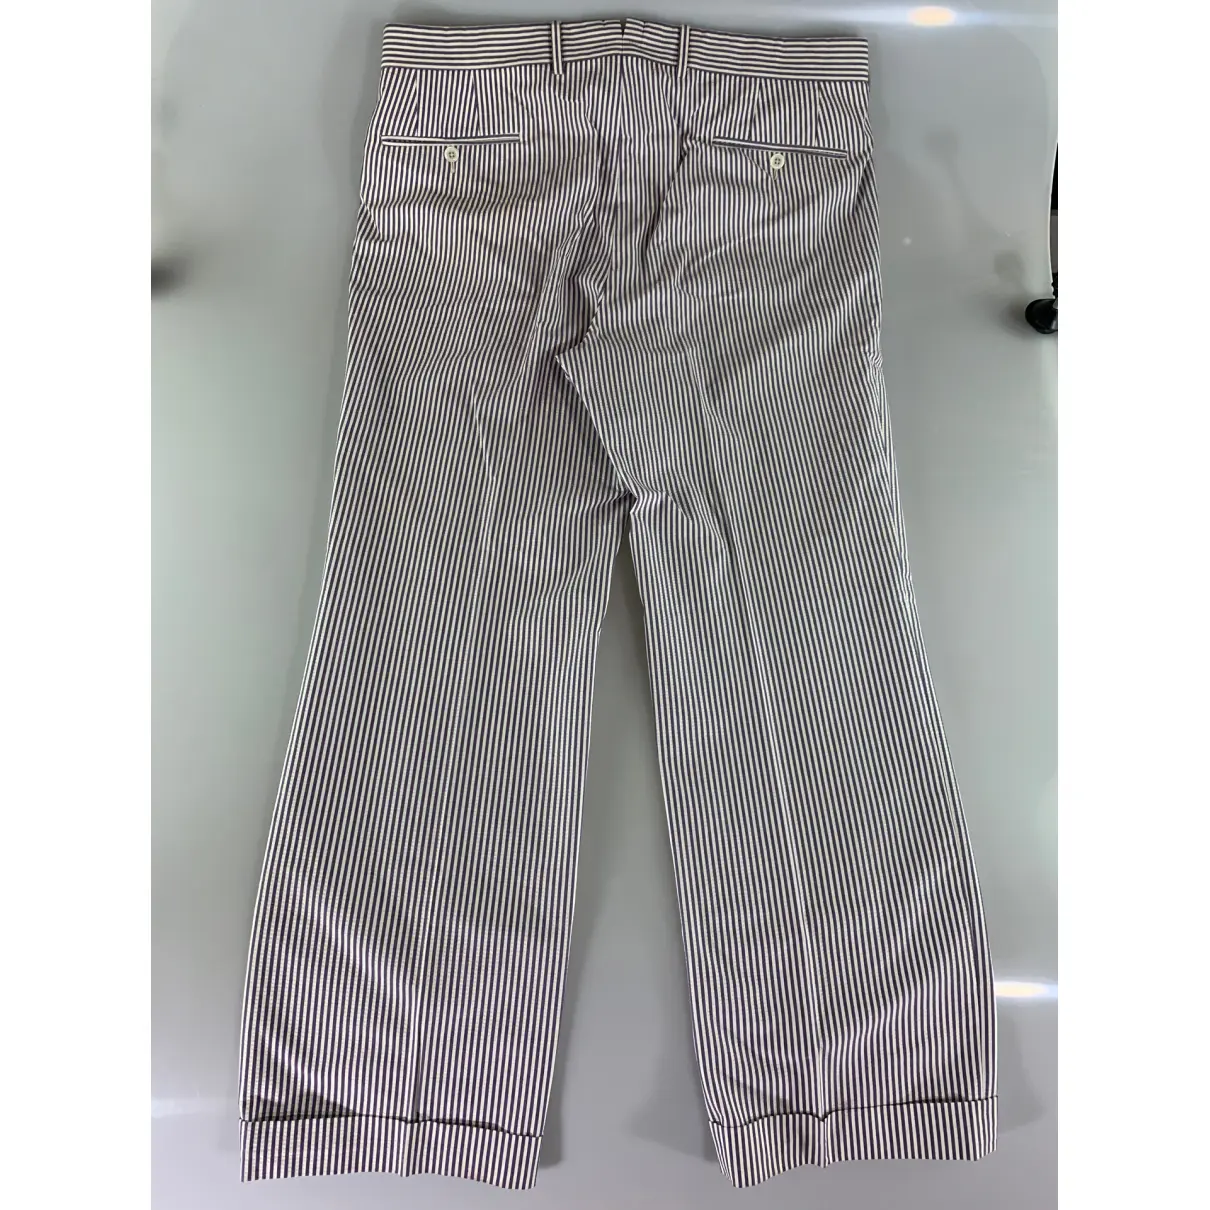 Luxury Tom Ford Trousers Men